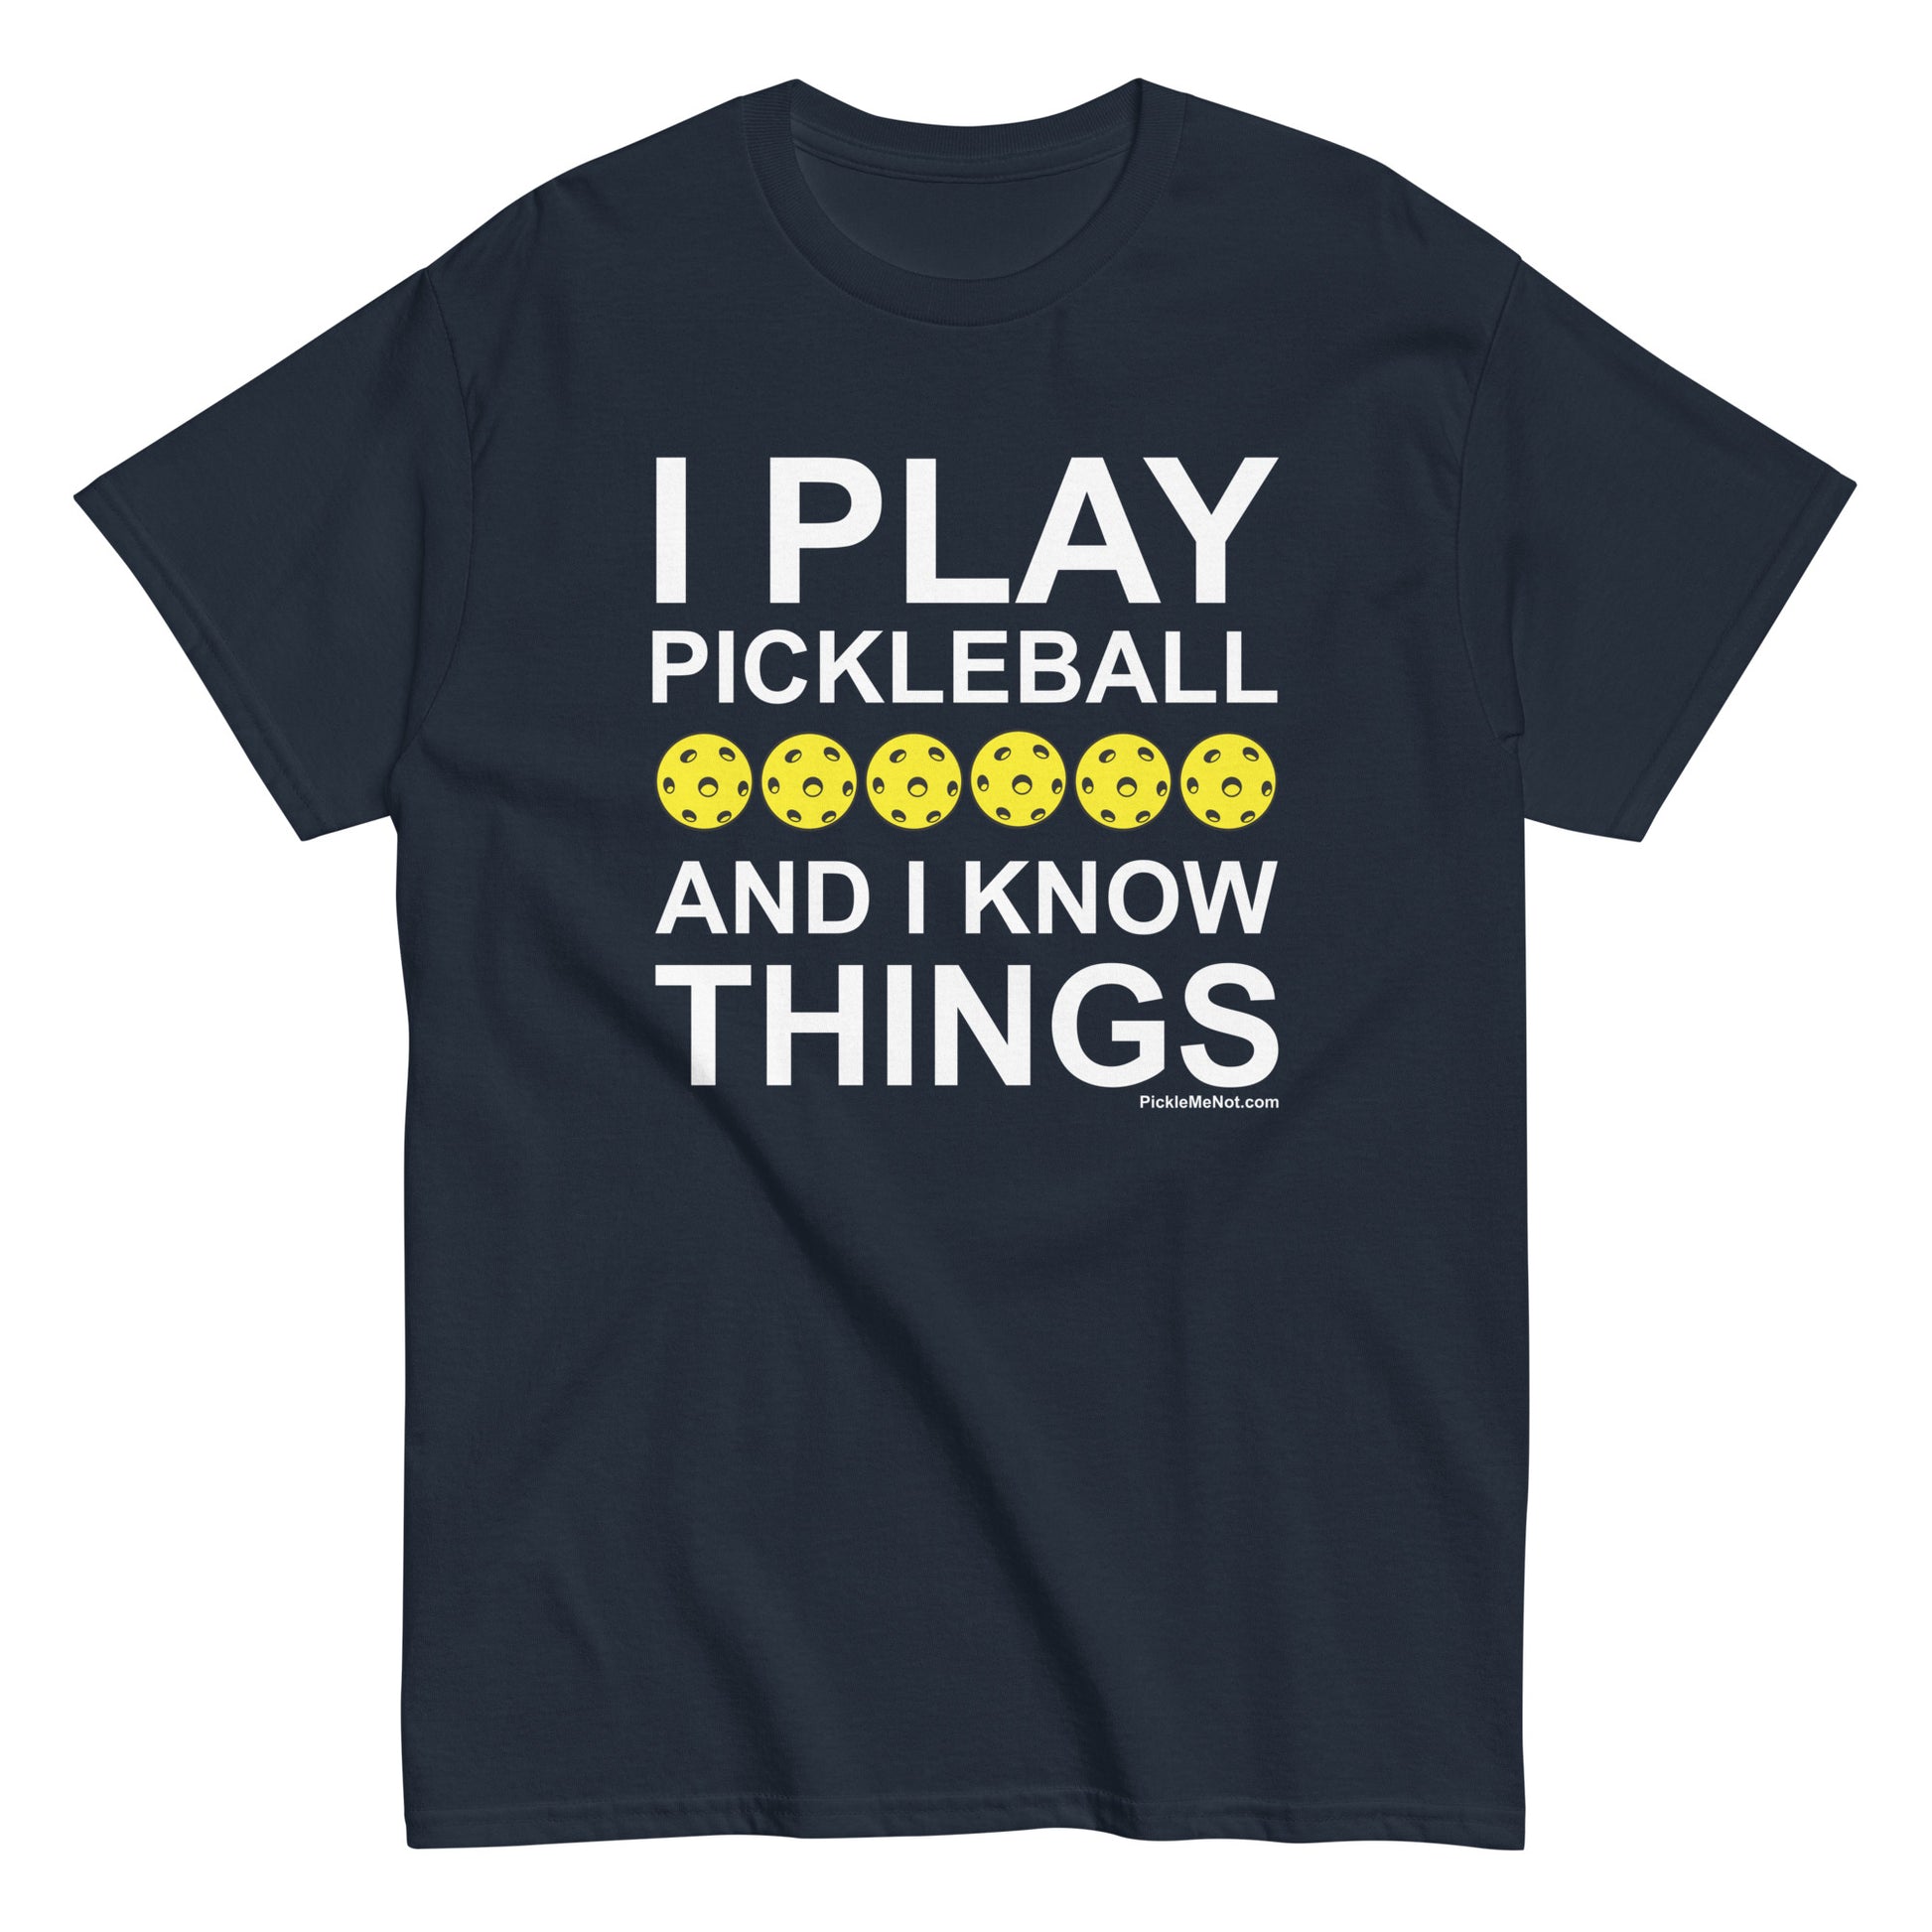 Fun Pickleball, "I Play Pickleball And I Know Things" Men's Classic Navy Tee